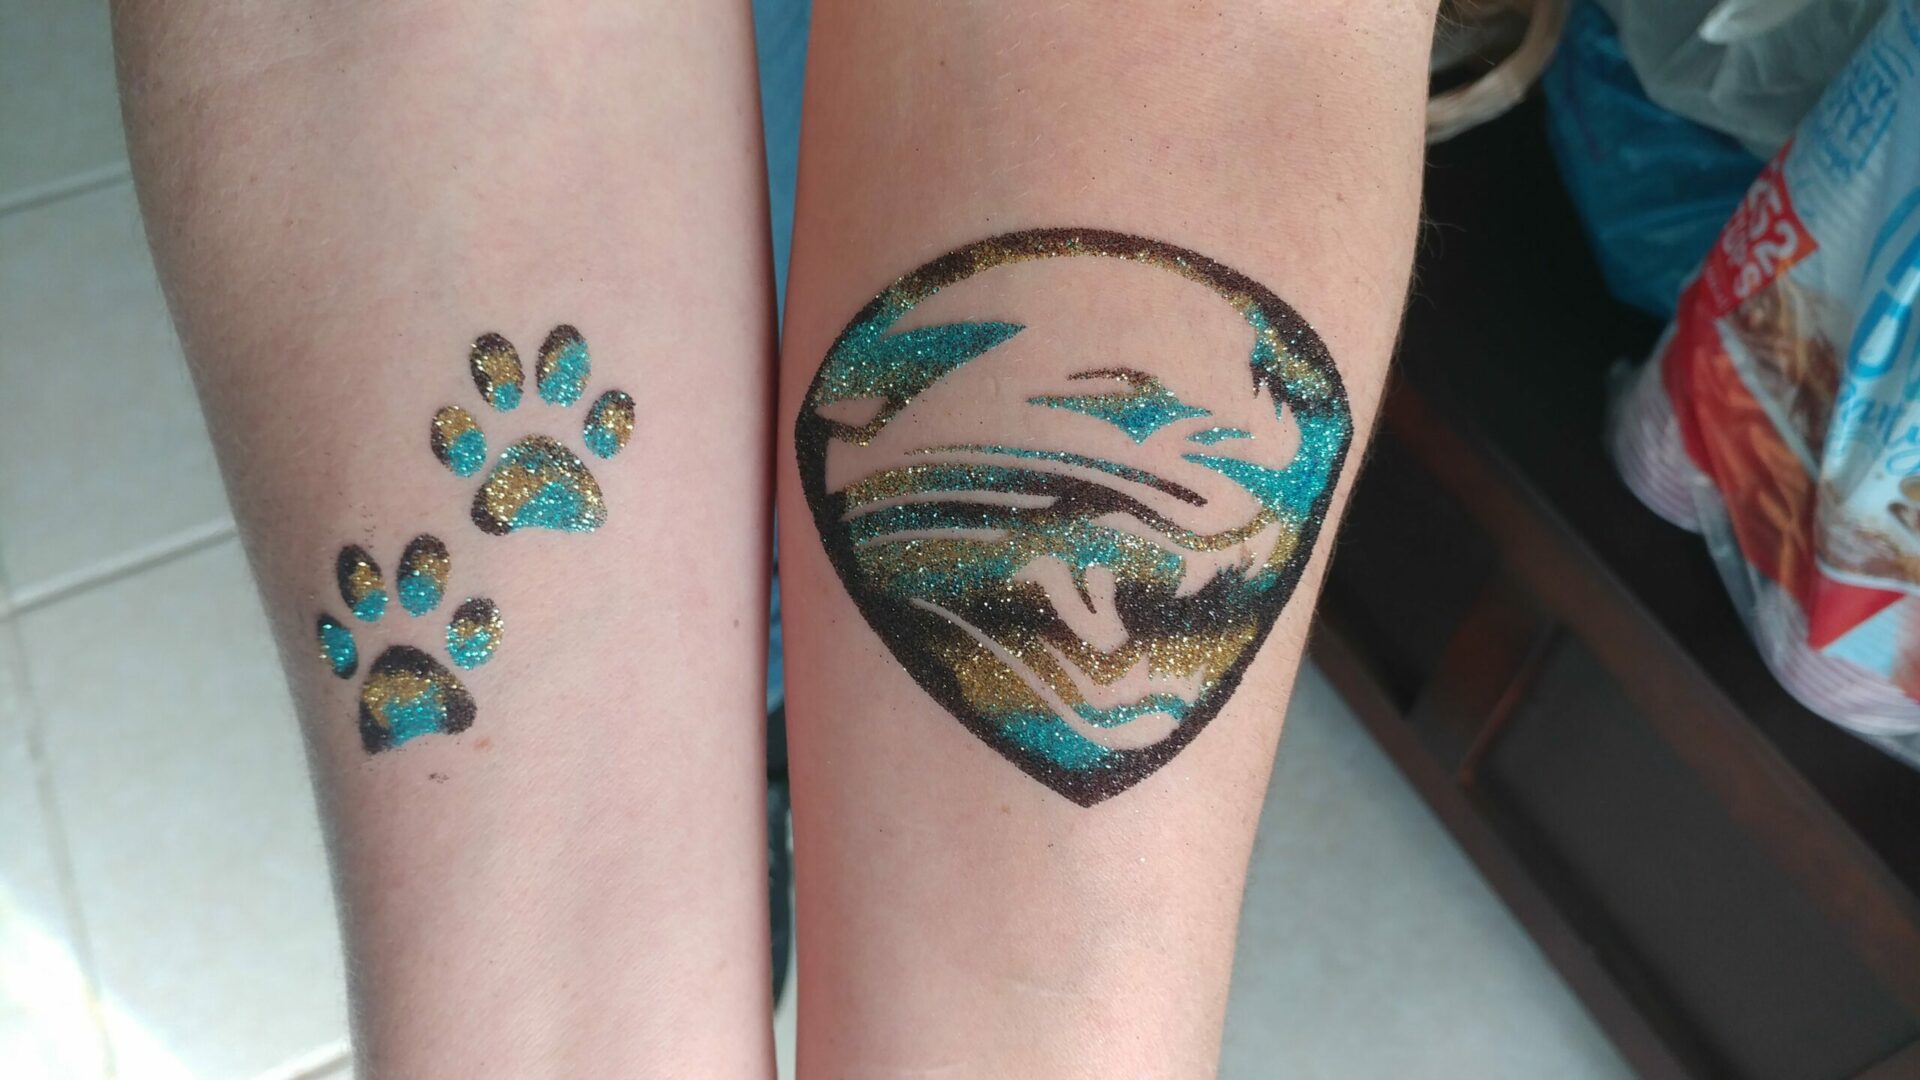 A tattoo of a dog 's head and paw print.